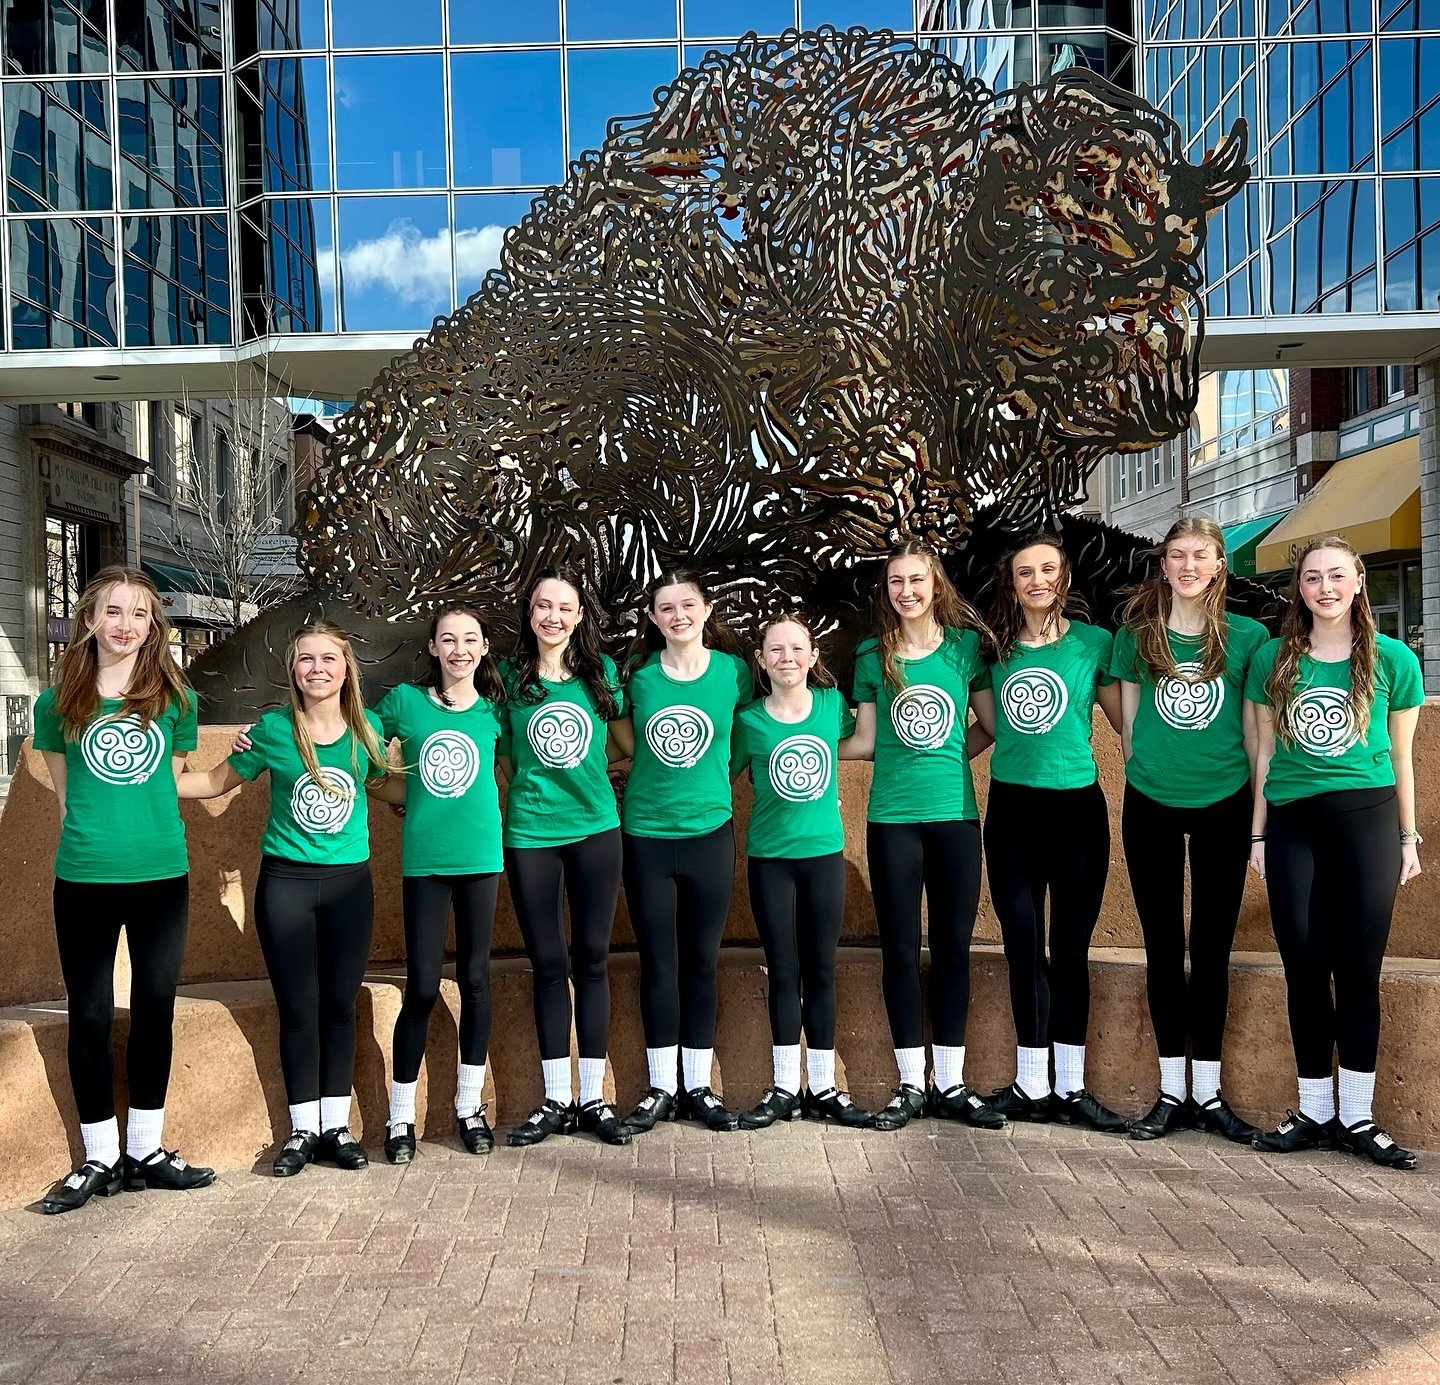 Safe travels and 🍀 GOOD LUCK 🍀 to our crew headed to Edmonton this weekend!

#feising #irishdanceregina #yqr #yeg